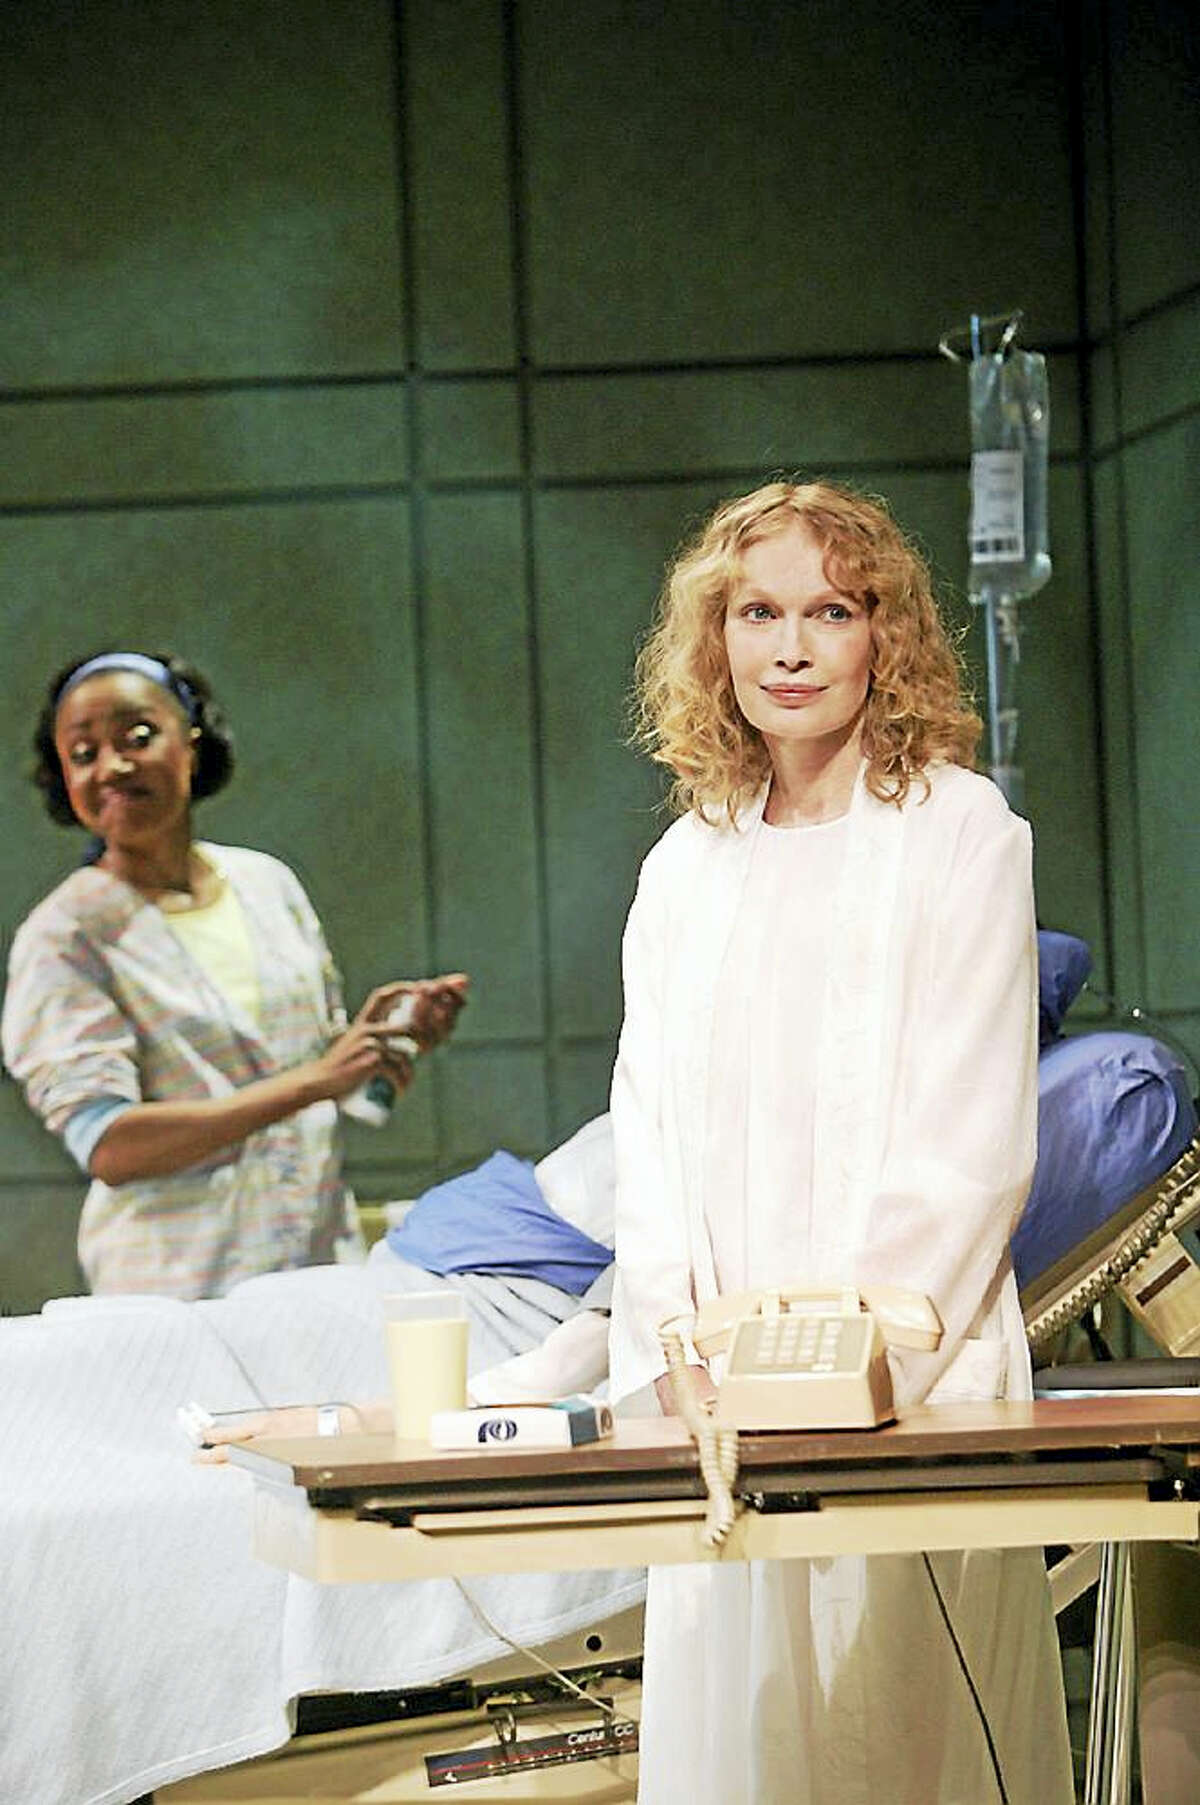 Mia Farrow in “Fran’s Bed” at Long Wharf in 2003.